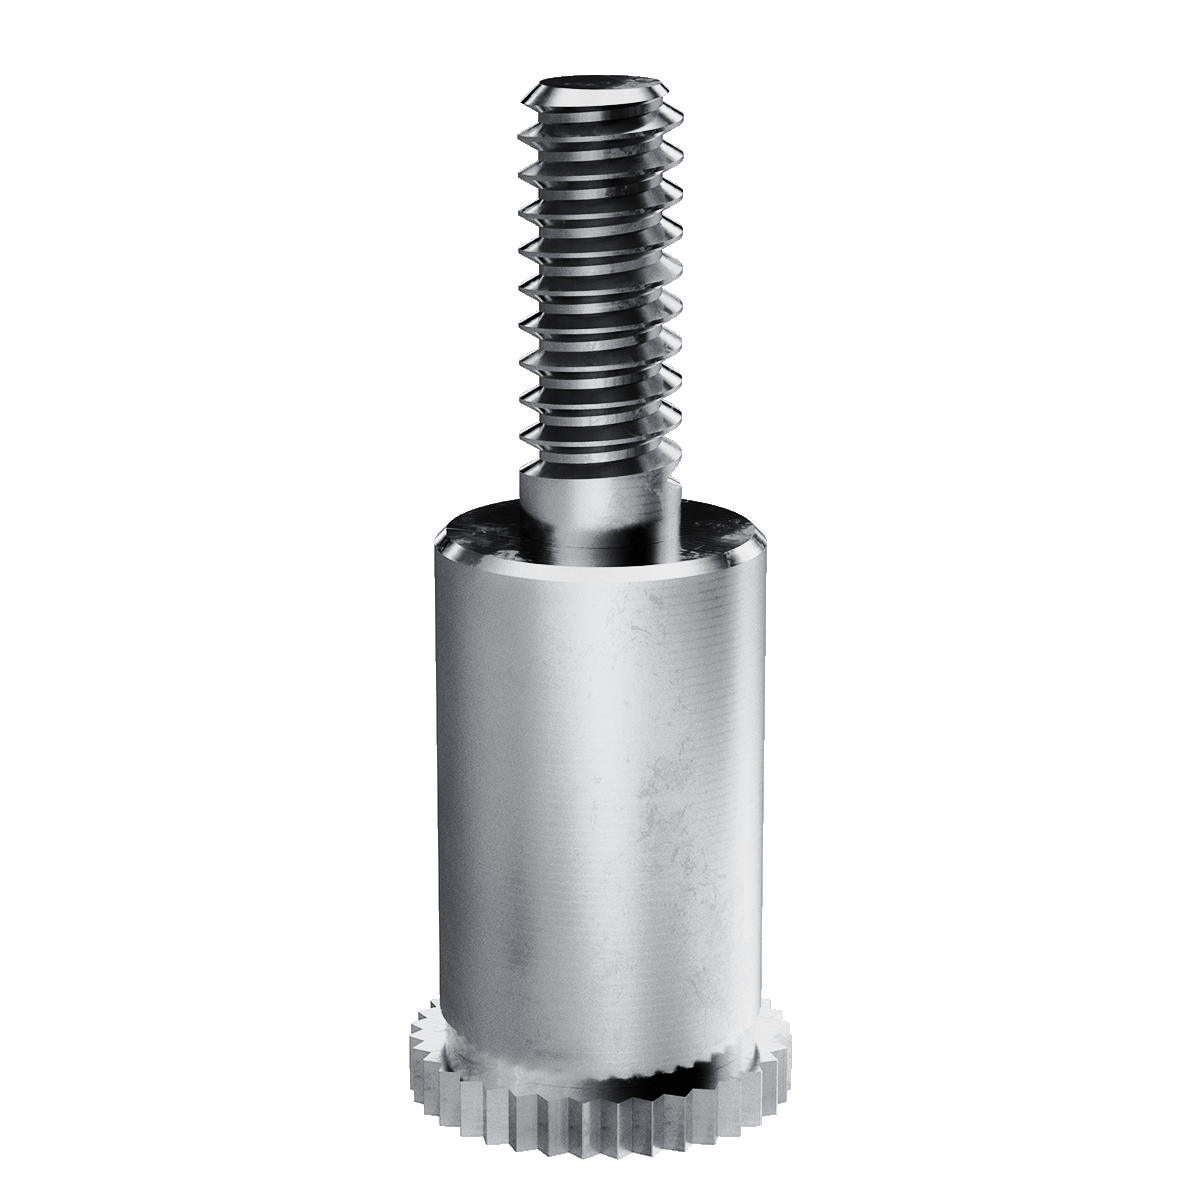 Self-Clinching Standoff, Male, Stainless Steel, Passivated, Metric, M3.5x0.6 x 12, 7.14 Hole dia, 100 Pack